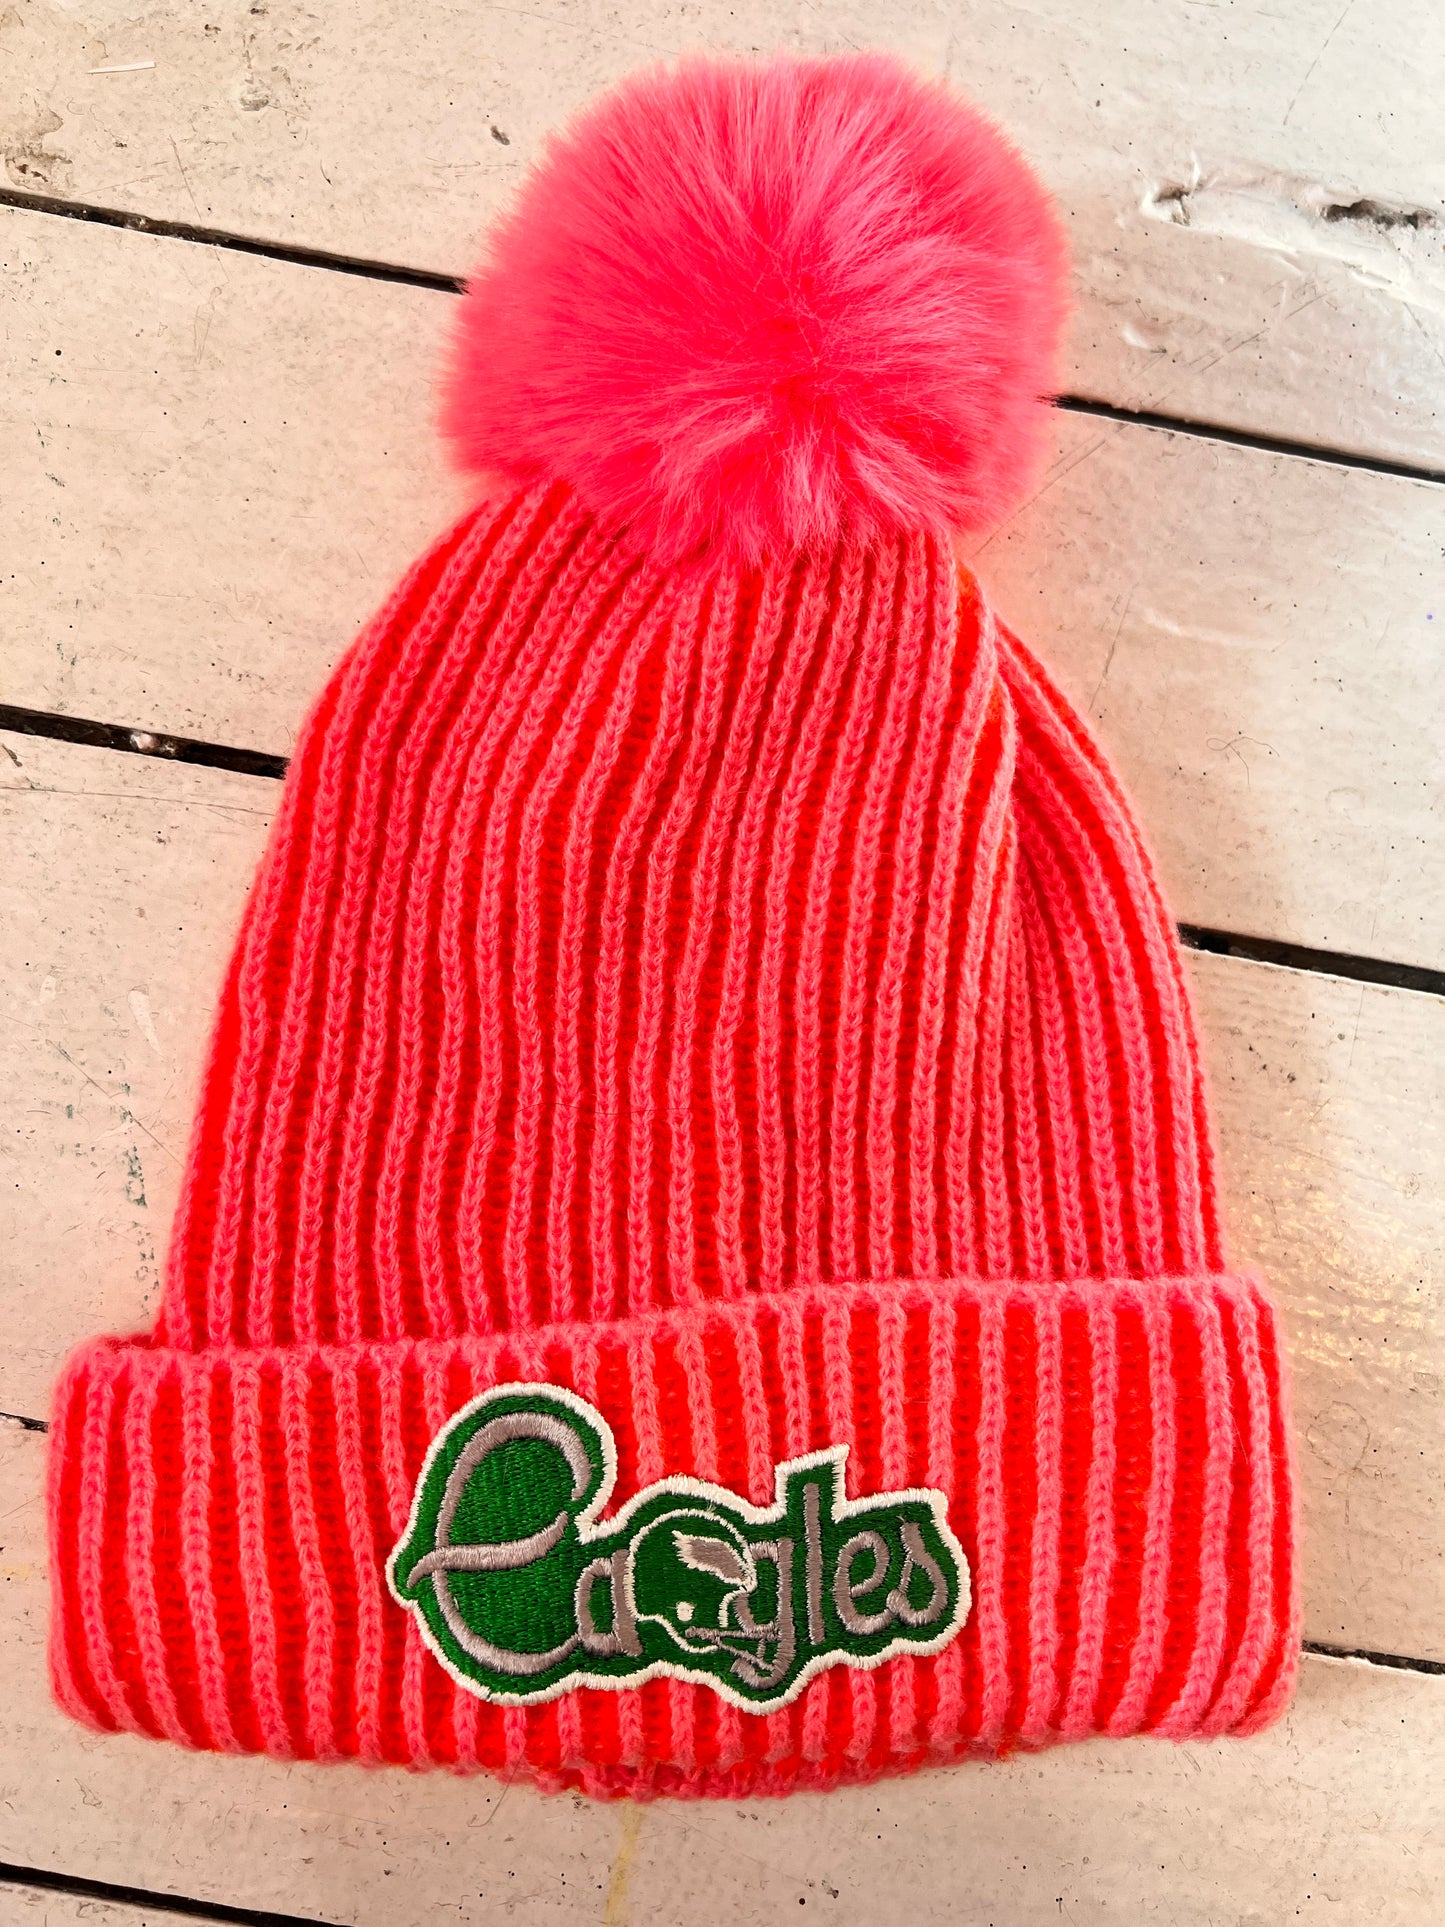 Vintage Eagles patch hot pink beanie